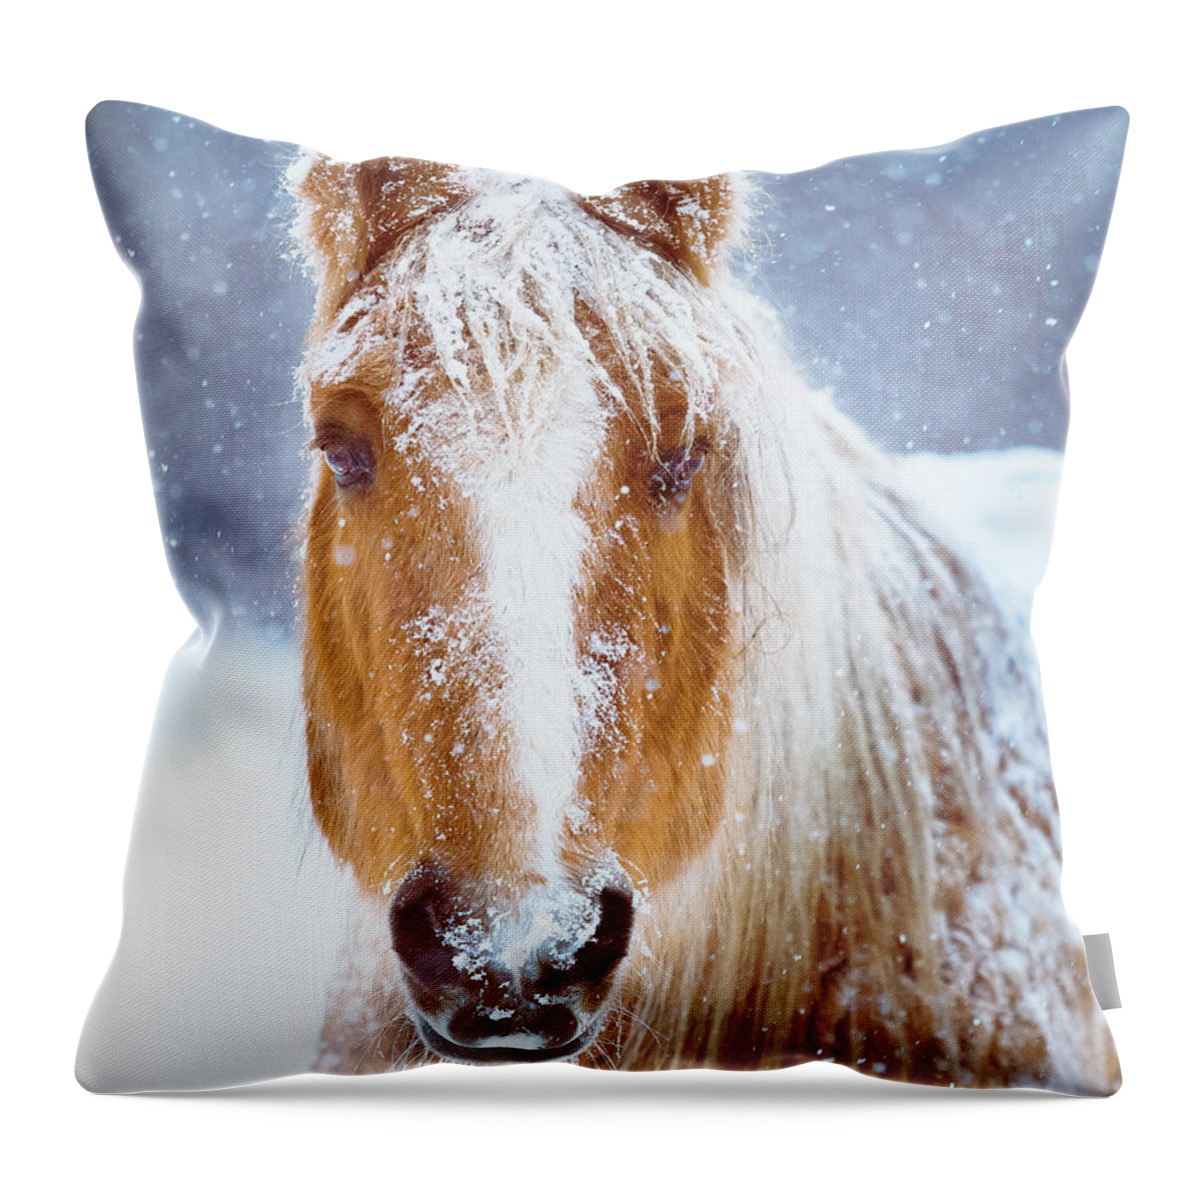 Winter Throw Pillow featuring the photograph Winter Horse Portrait by Debi Bishop